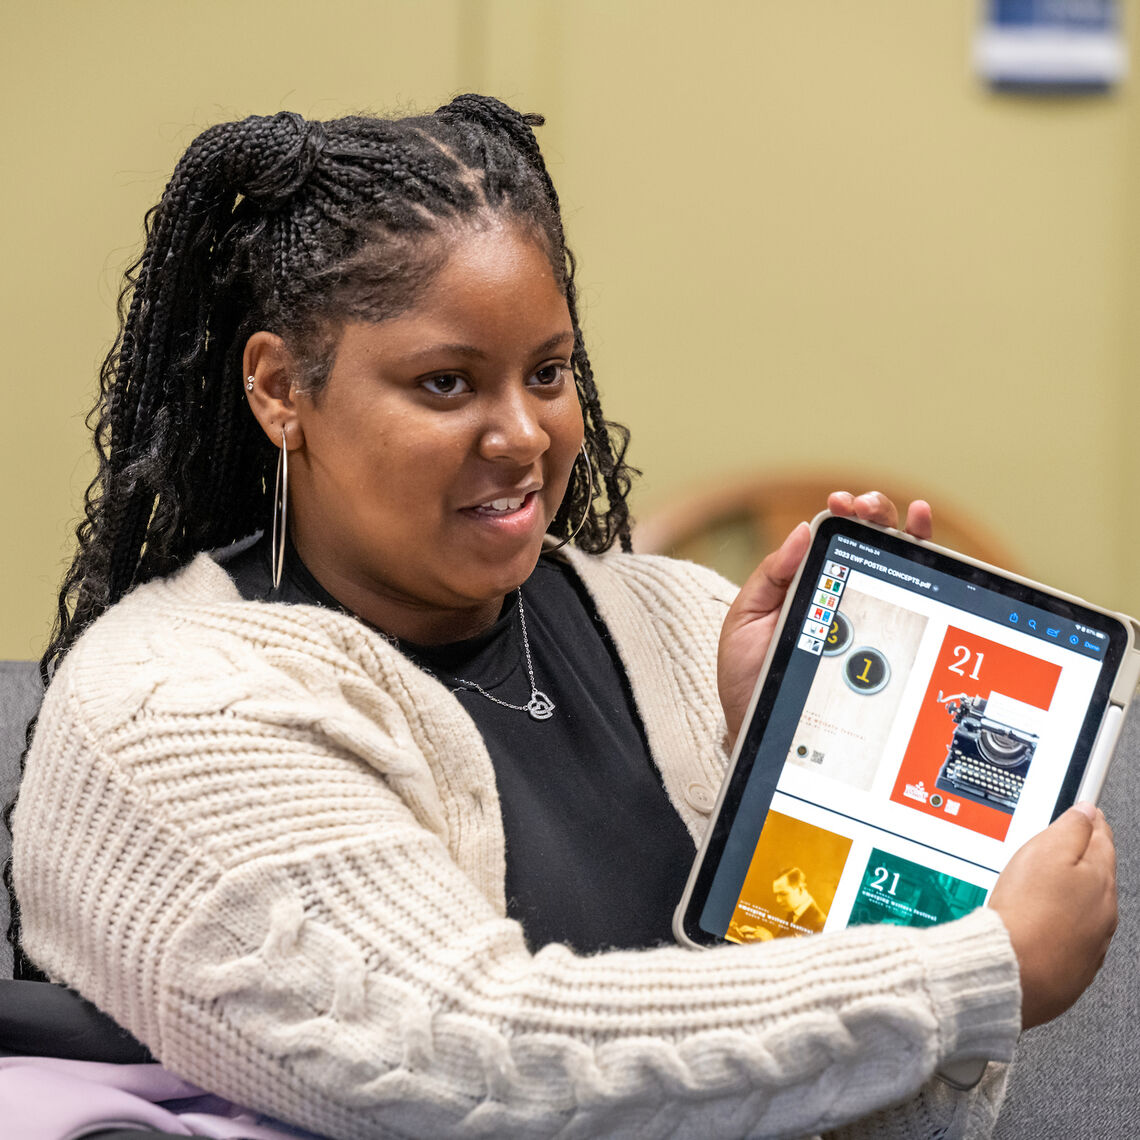 "I'm truly excited to meet the authors and learn from them," says Zyaira James '23, member of the Emerging Writers Festival planning committee.